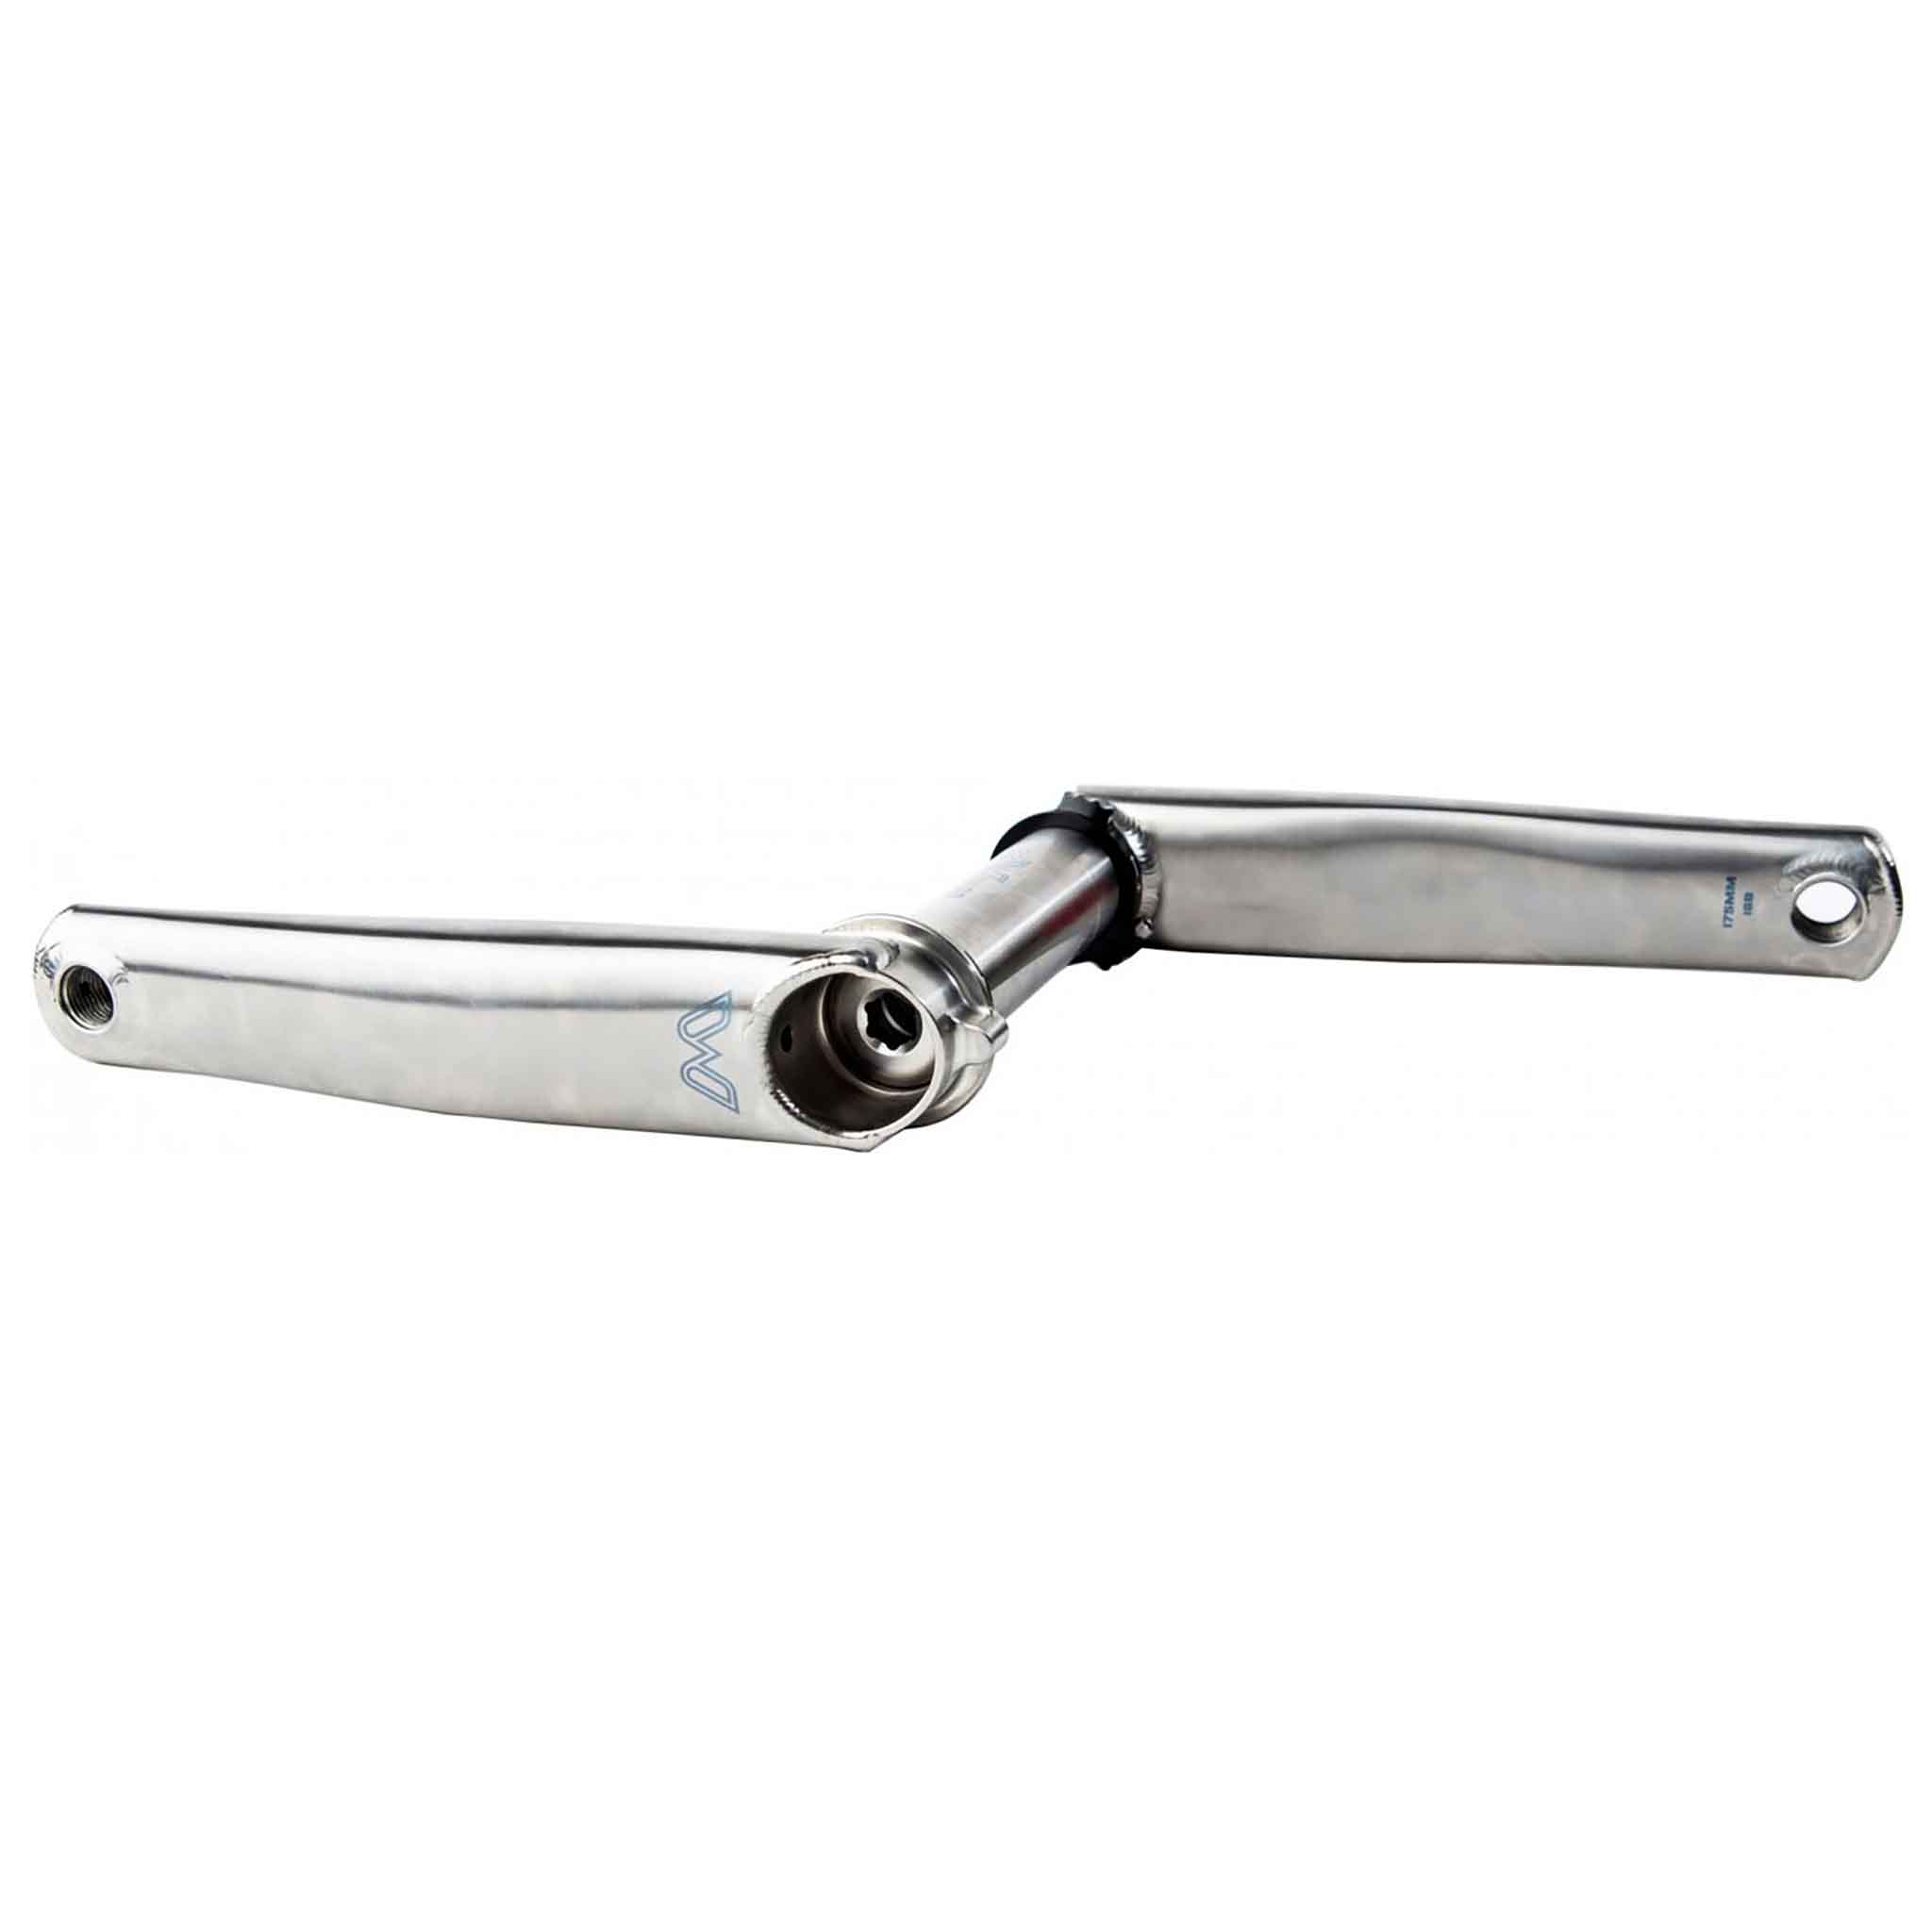 Cane Creek eeWings Ti Cranks 170mm, 3-Bolt, 30mm Spindle